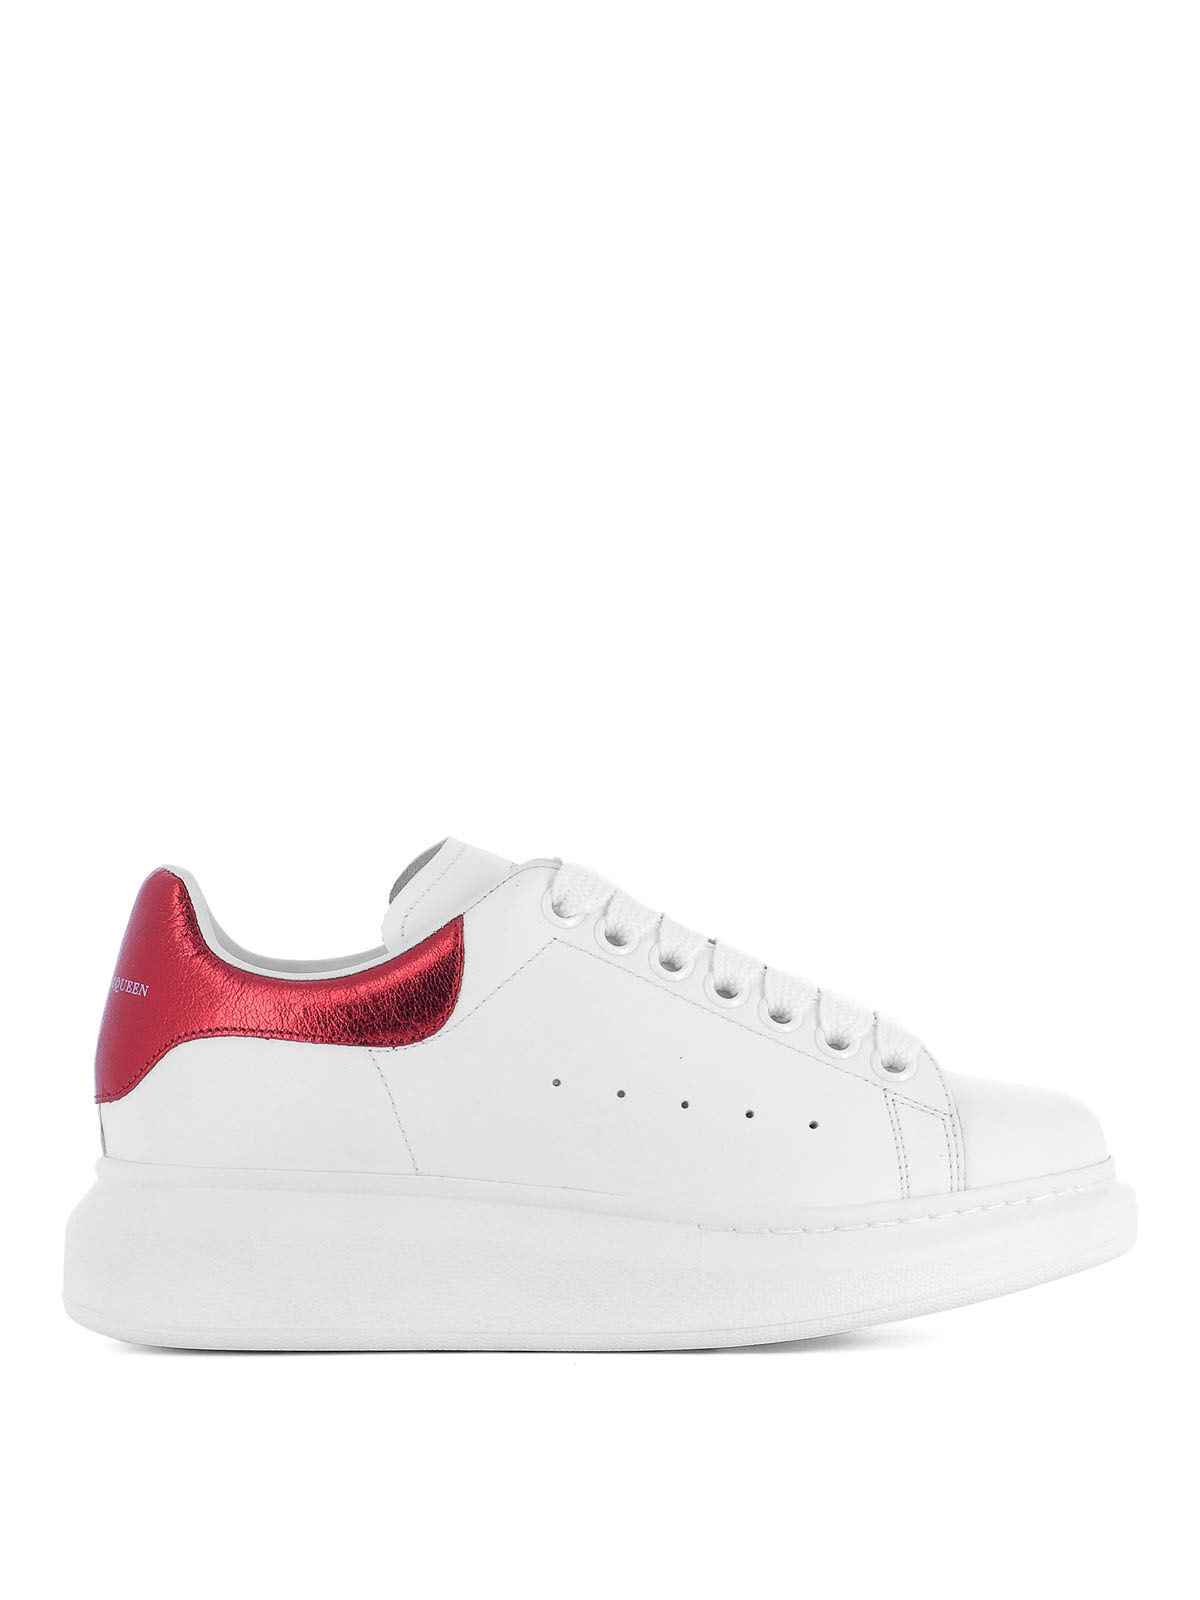 Trainers Alexander Mcqueen - Red detail leather sneakers - 462214WHFBU9093